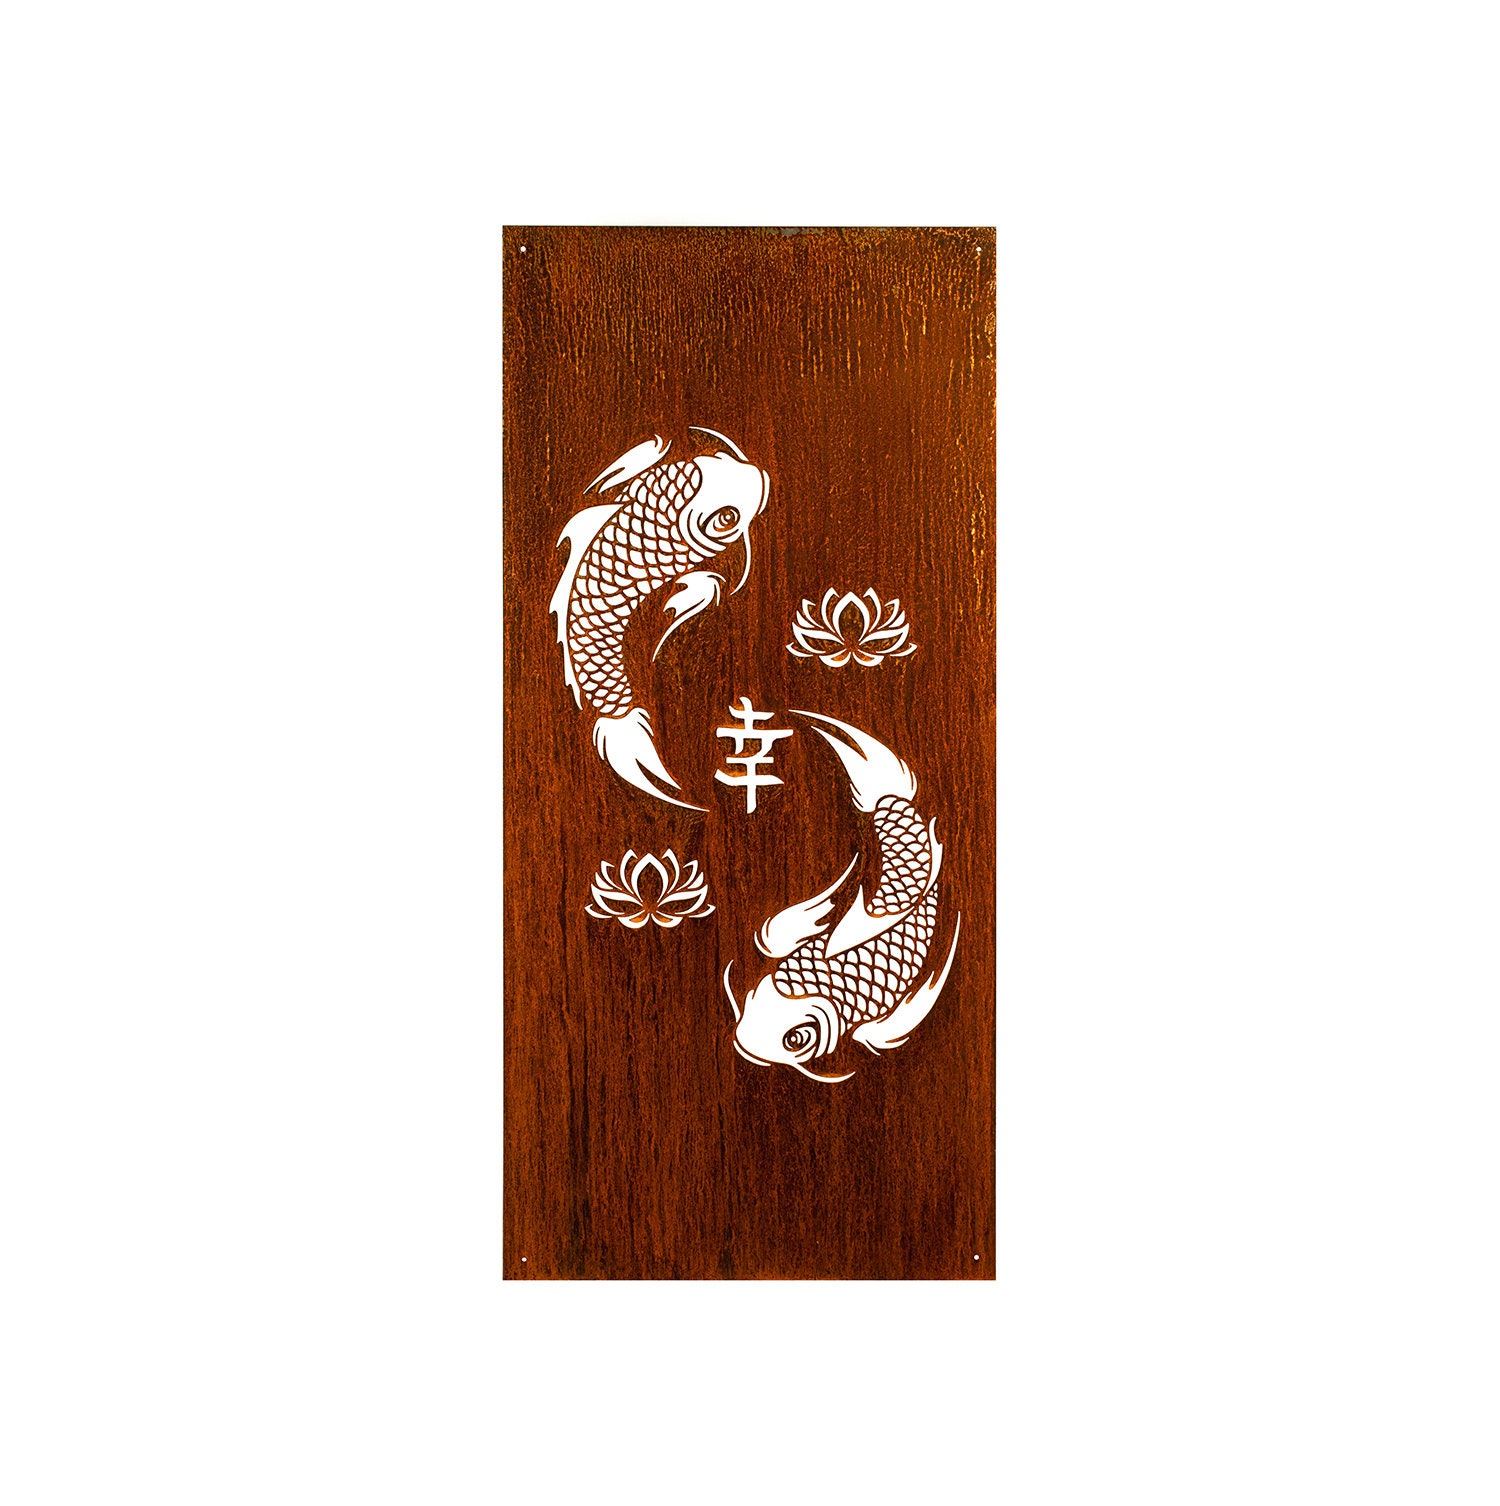 Koi Fish Art With Kanji & Lotus Flower, Patio Privacy, Oversize Metal Art,  Large Privacy Screens, Deck Fencing Screens | P637